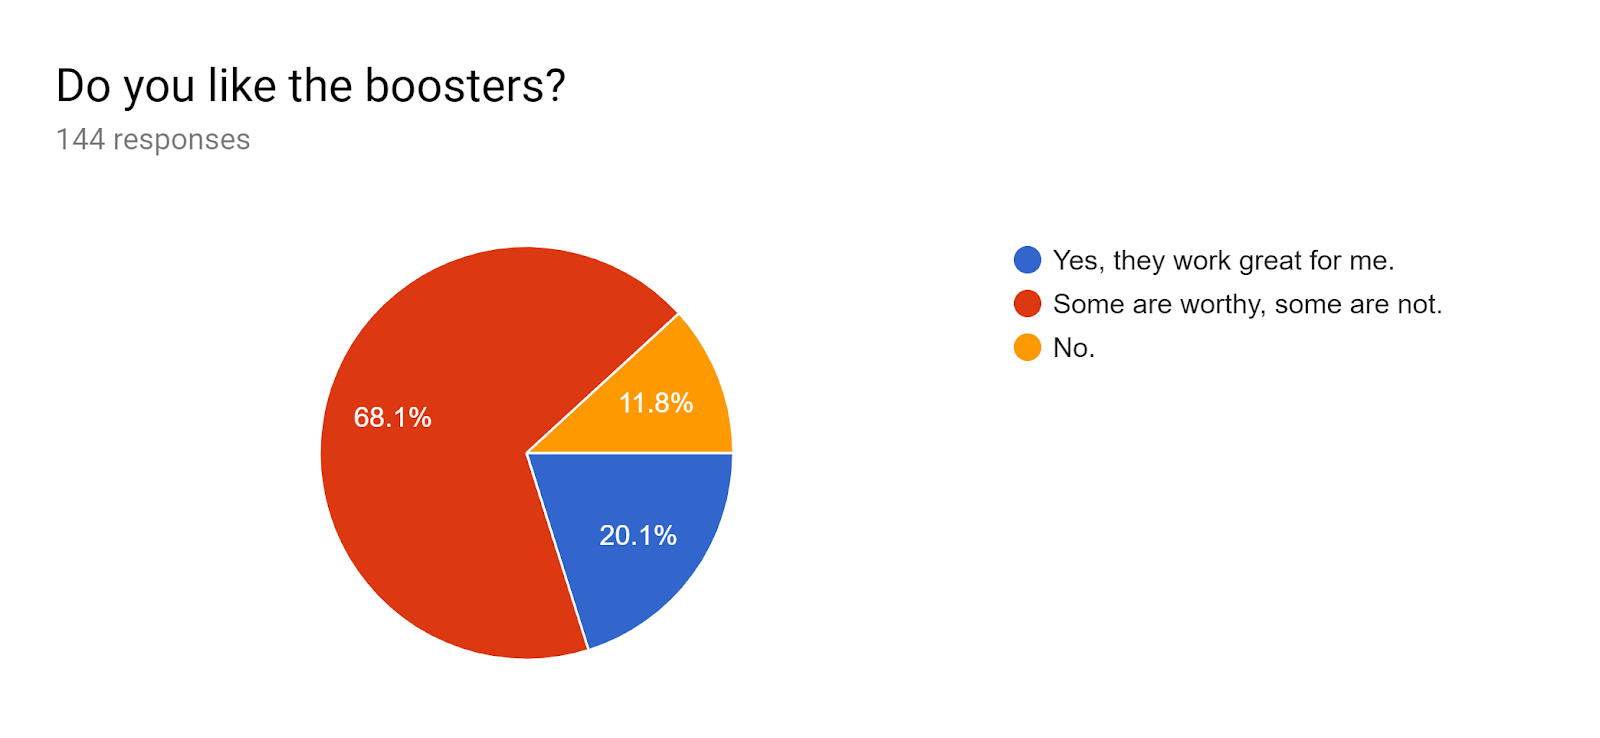 Forms response chart. Question title: Do you like the boosters?. Number of responses: 144 responses.